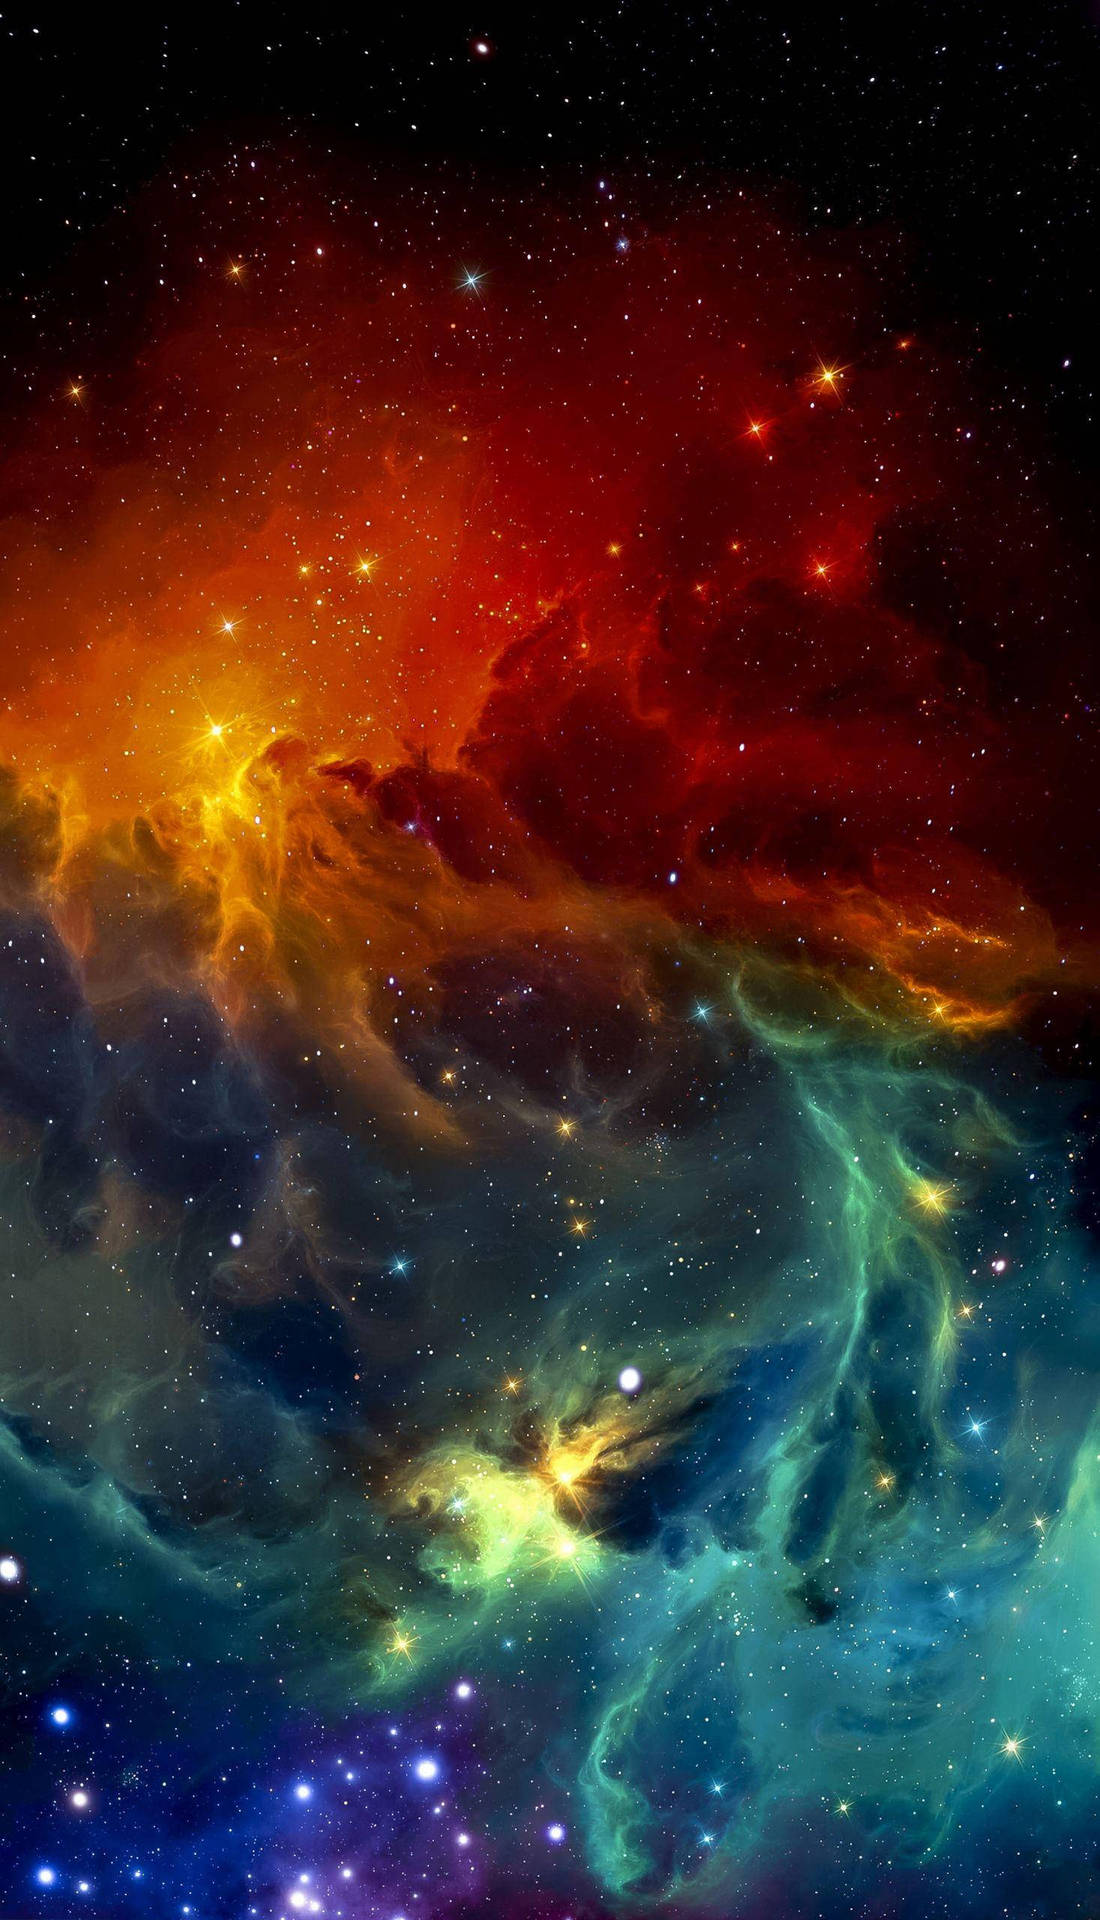 A Colorful Space With Stars And Nebulas Wallpaper